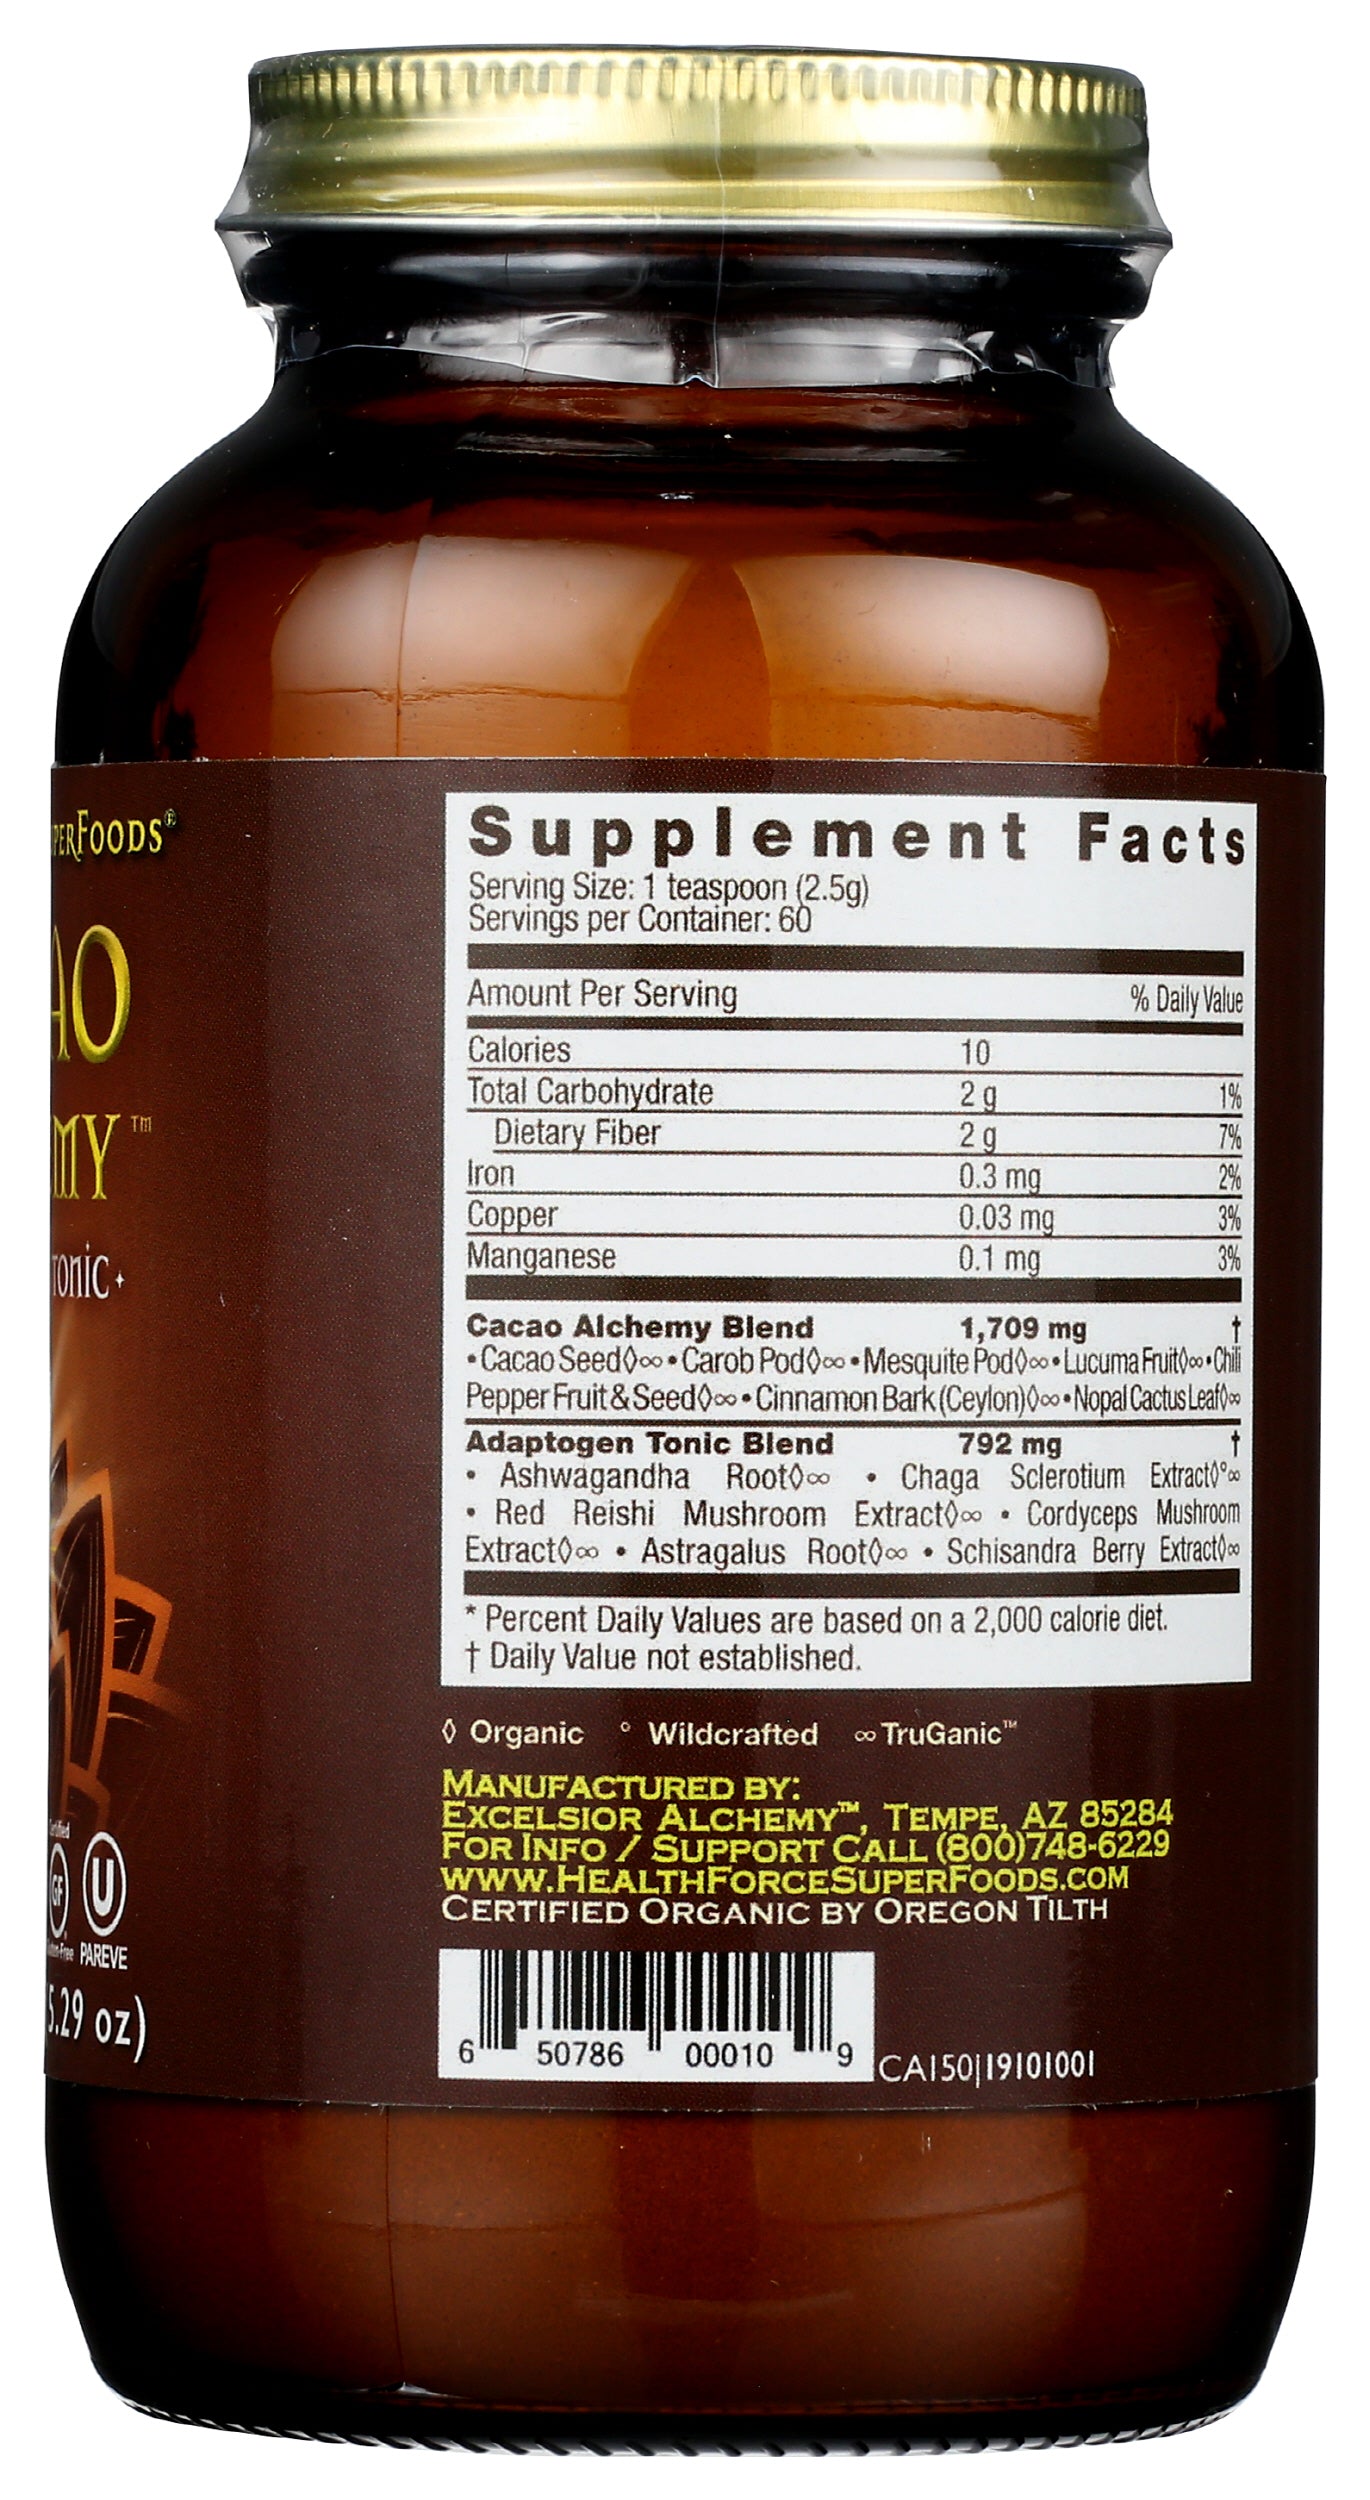 HealthForce SuperFoods Cacao Alchemy 150g Back of Bottle